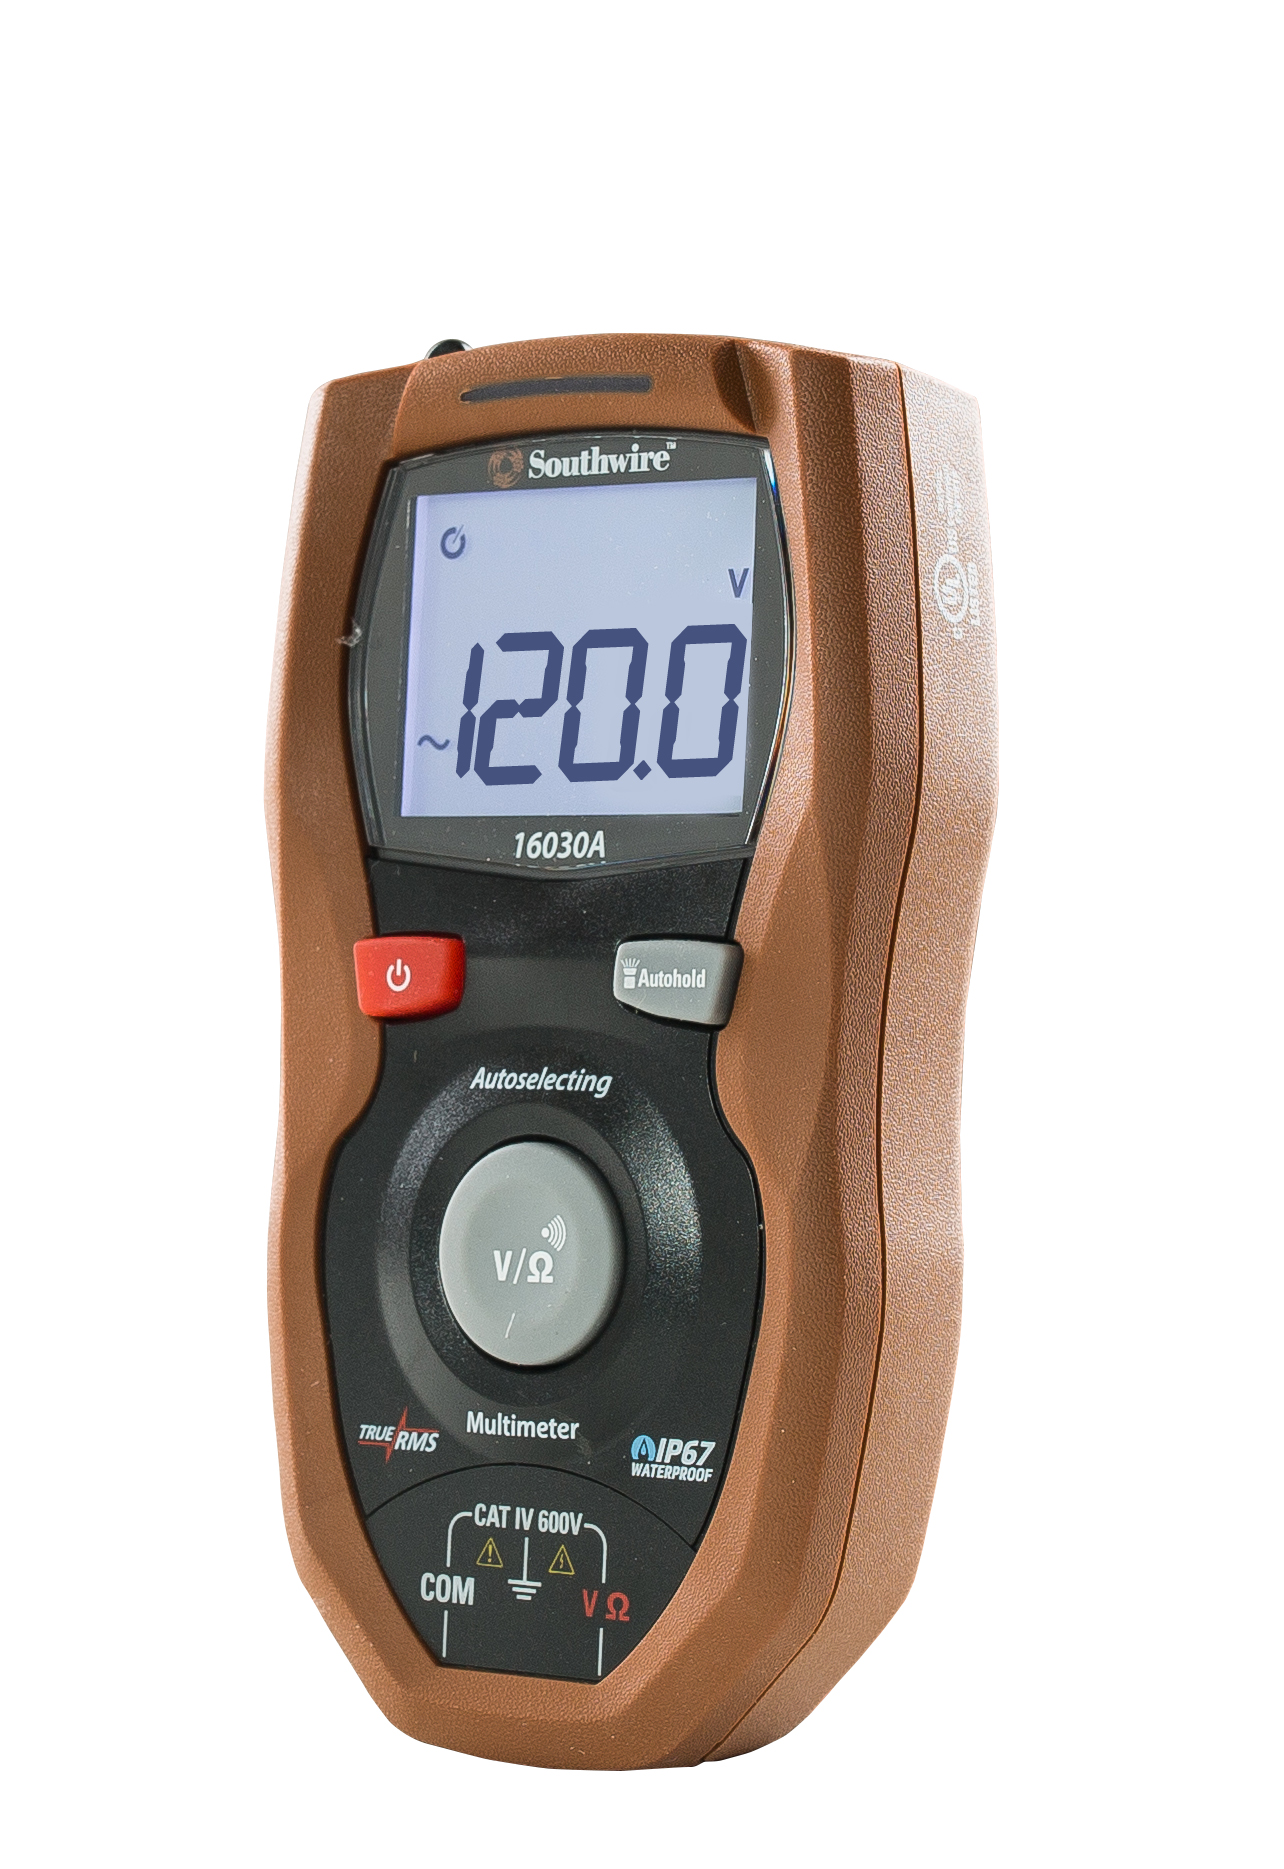 16030A Autoselecting TrueRMS Multimeter with IP67 Waterproof/Dust Proof Housing, CAT IV 600V.